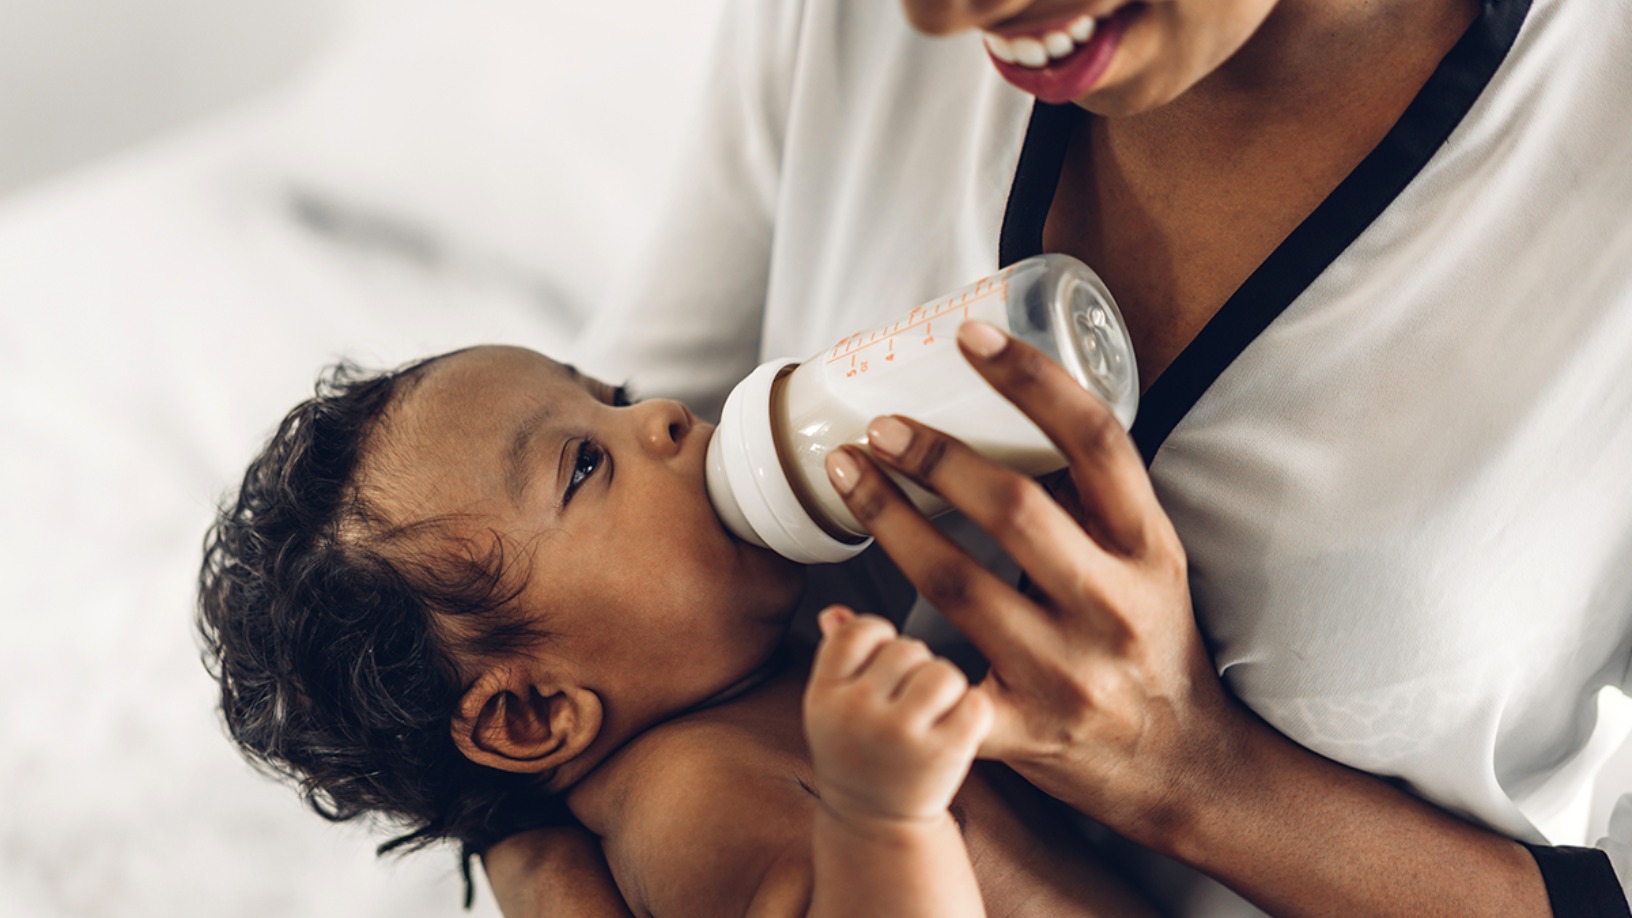 Biomilq: Creating cell-based mothers’ milk in a lab